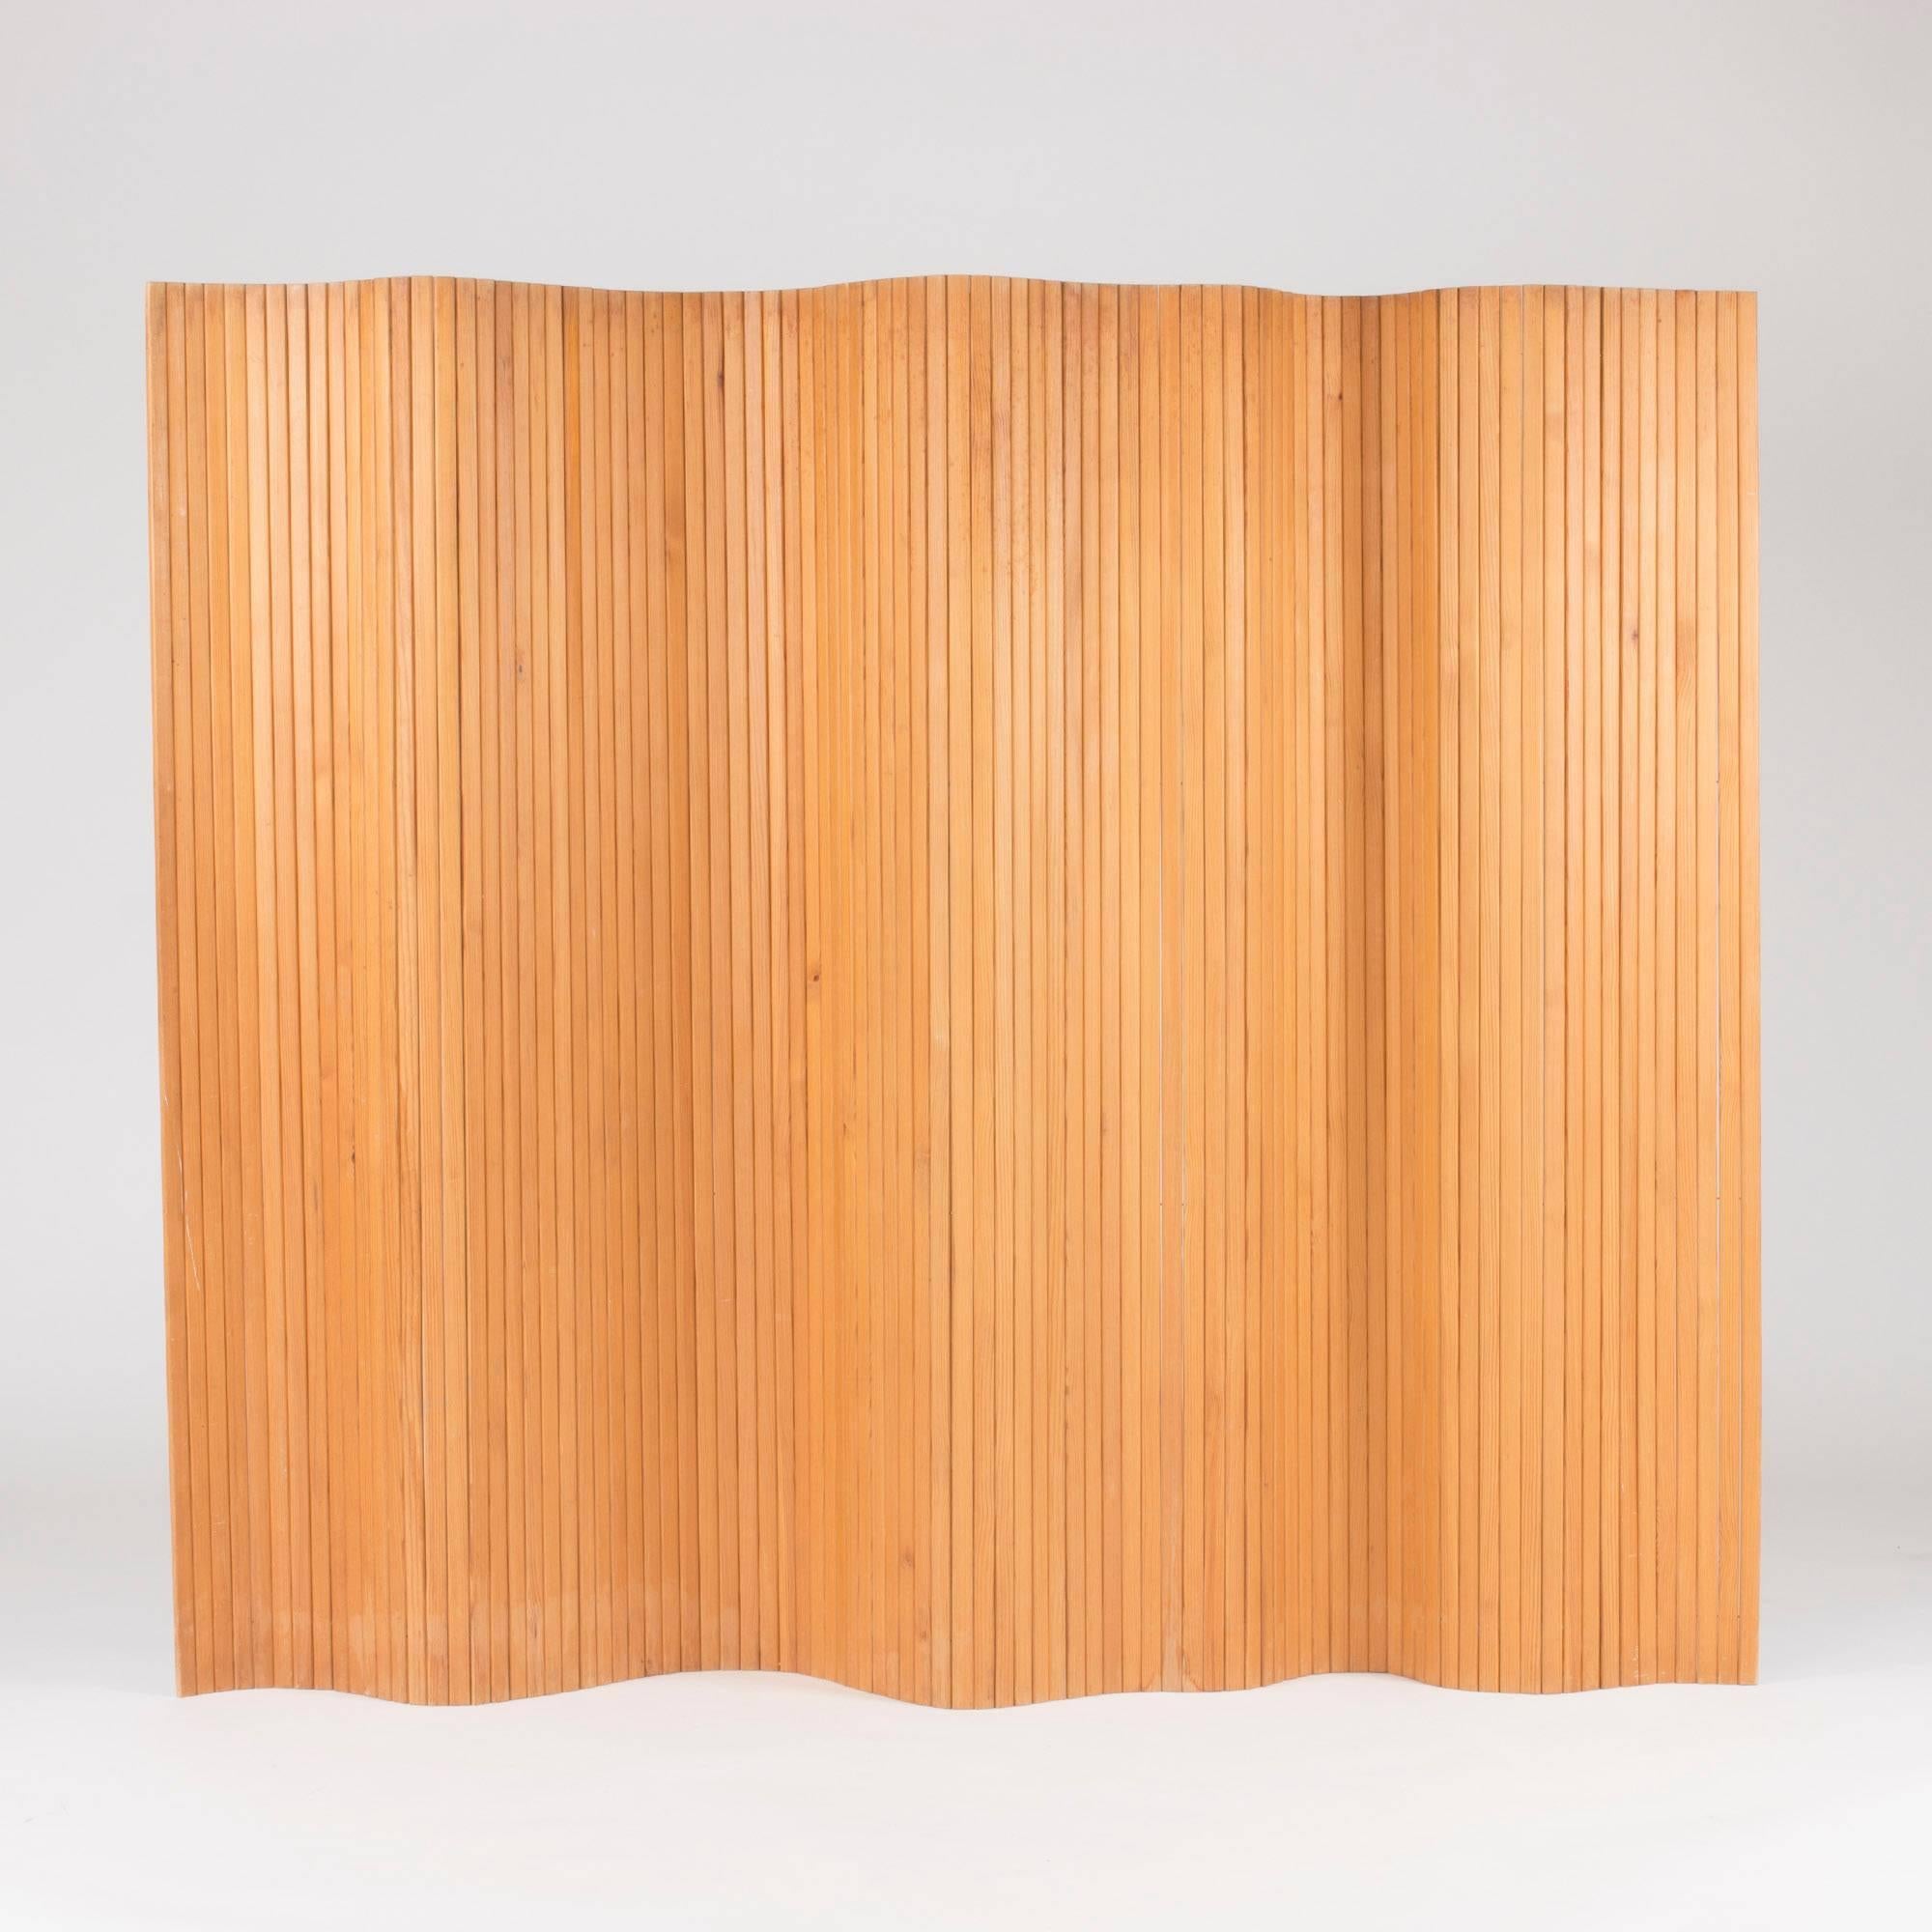 Beautiful room divider by Alvar Aalto, made from vertical slats of pine adjoined with metal wires. Can be shaped in various ways and stands steadily on the ground. Original condition with some scratches and spots.